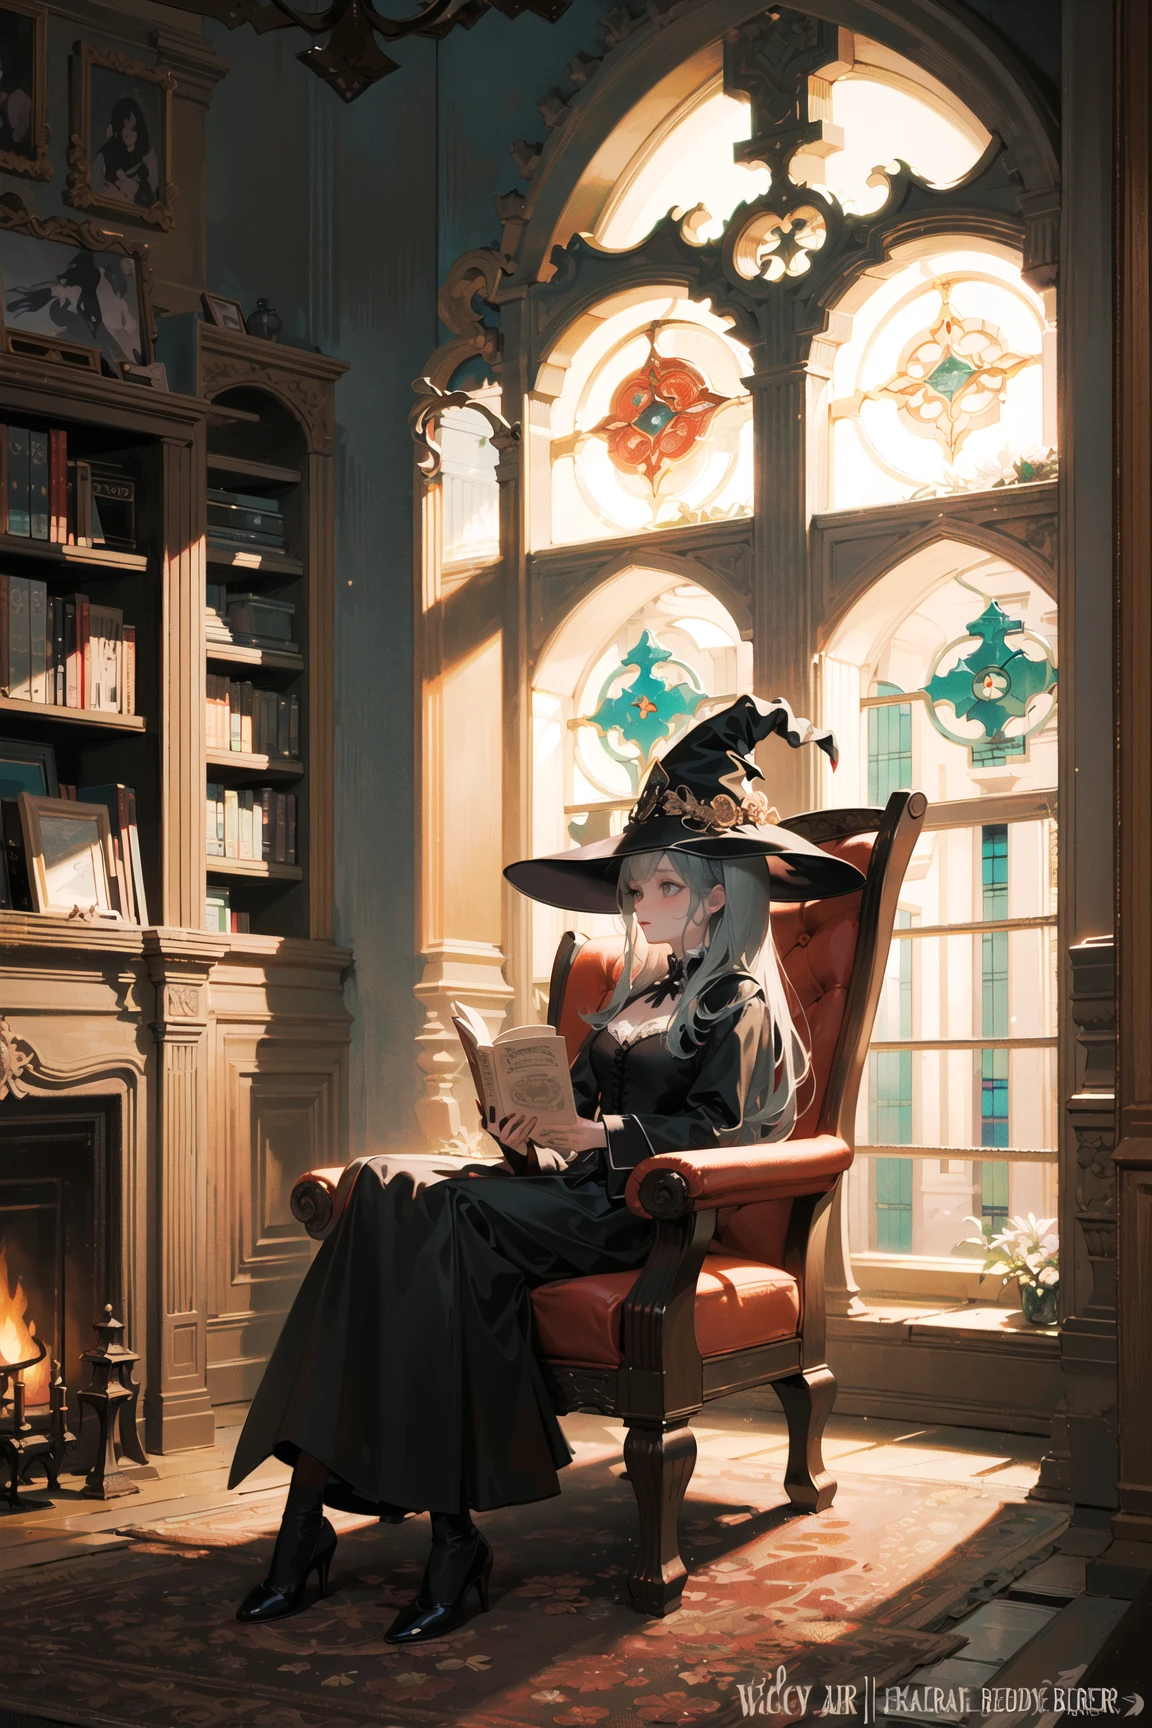 (witch:1.2), (indoors), antique, (magical:1.1), (night, moonlight), 1 girl, (sitting in an armchair, reading), (stone fireplace:1.2), (gothic window), dark room, bookshelf, (fantasy:1.2), (gothic:1.4)